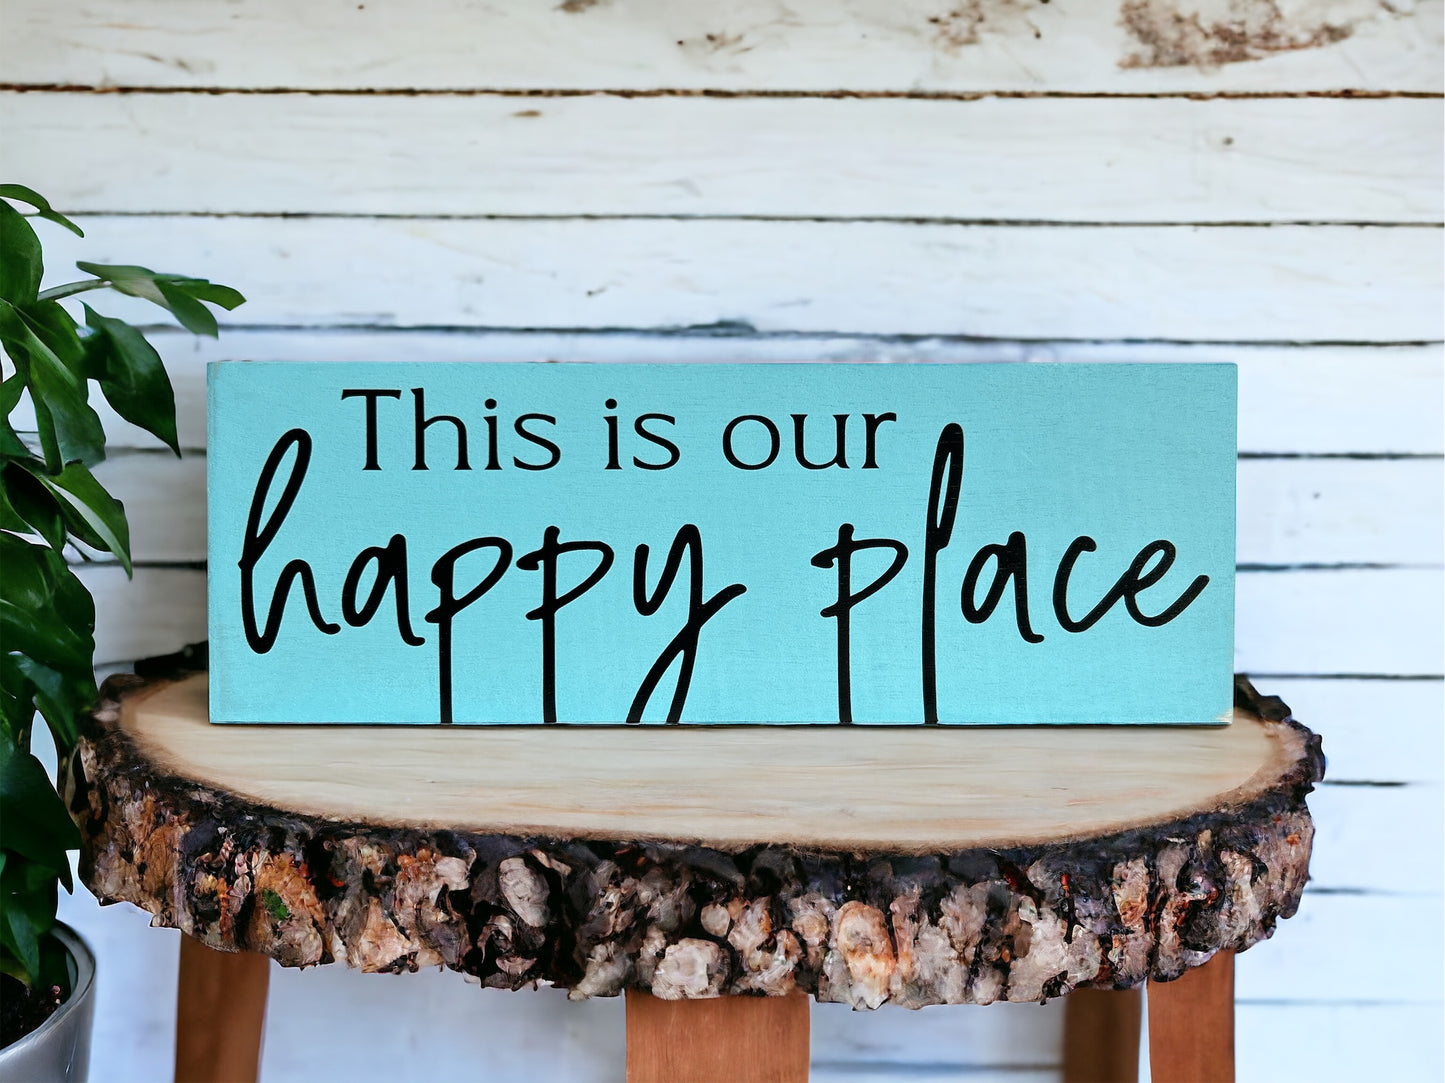 This is Our Happy Place - Rustic Wood Shelf Sitter